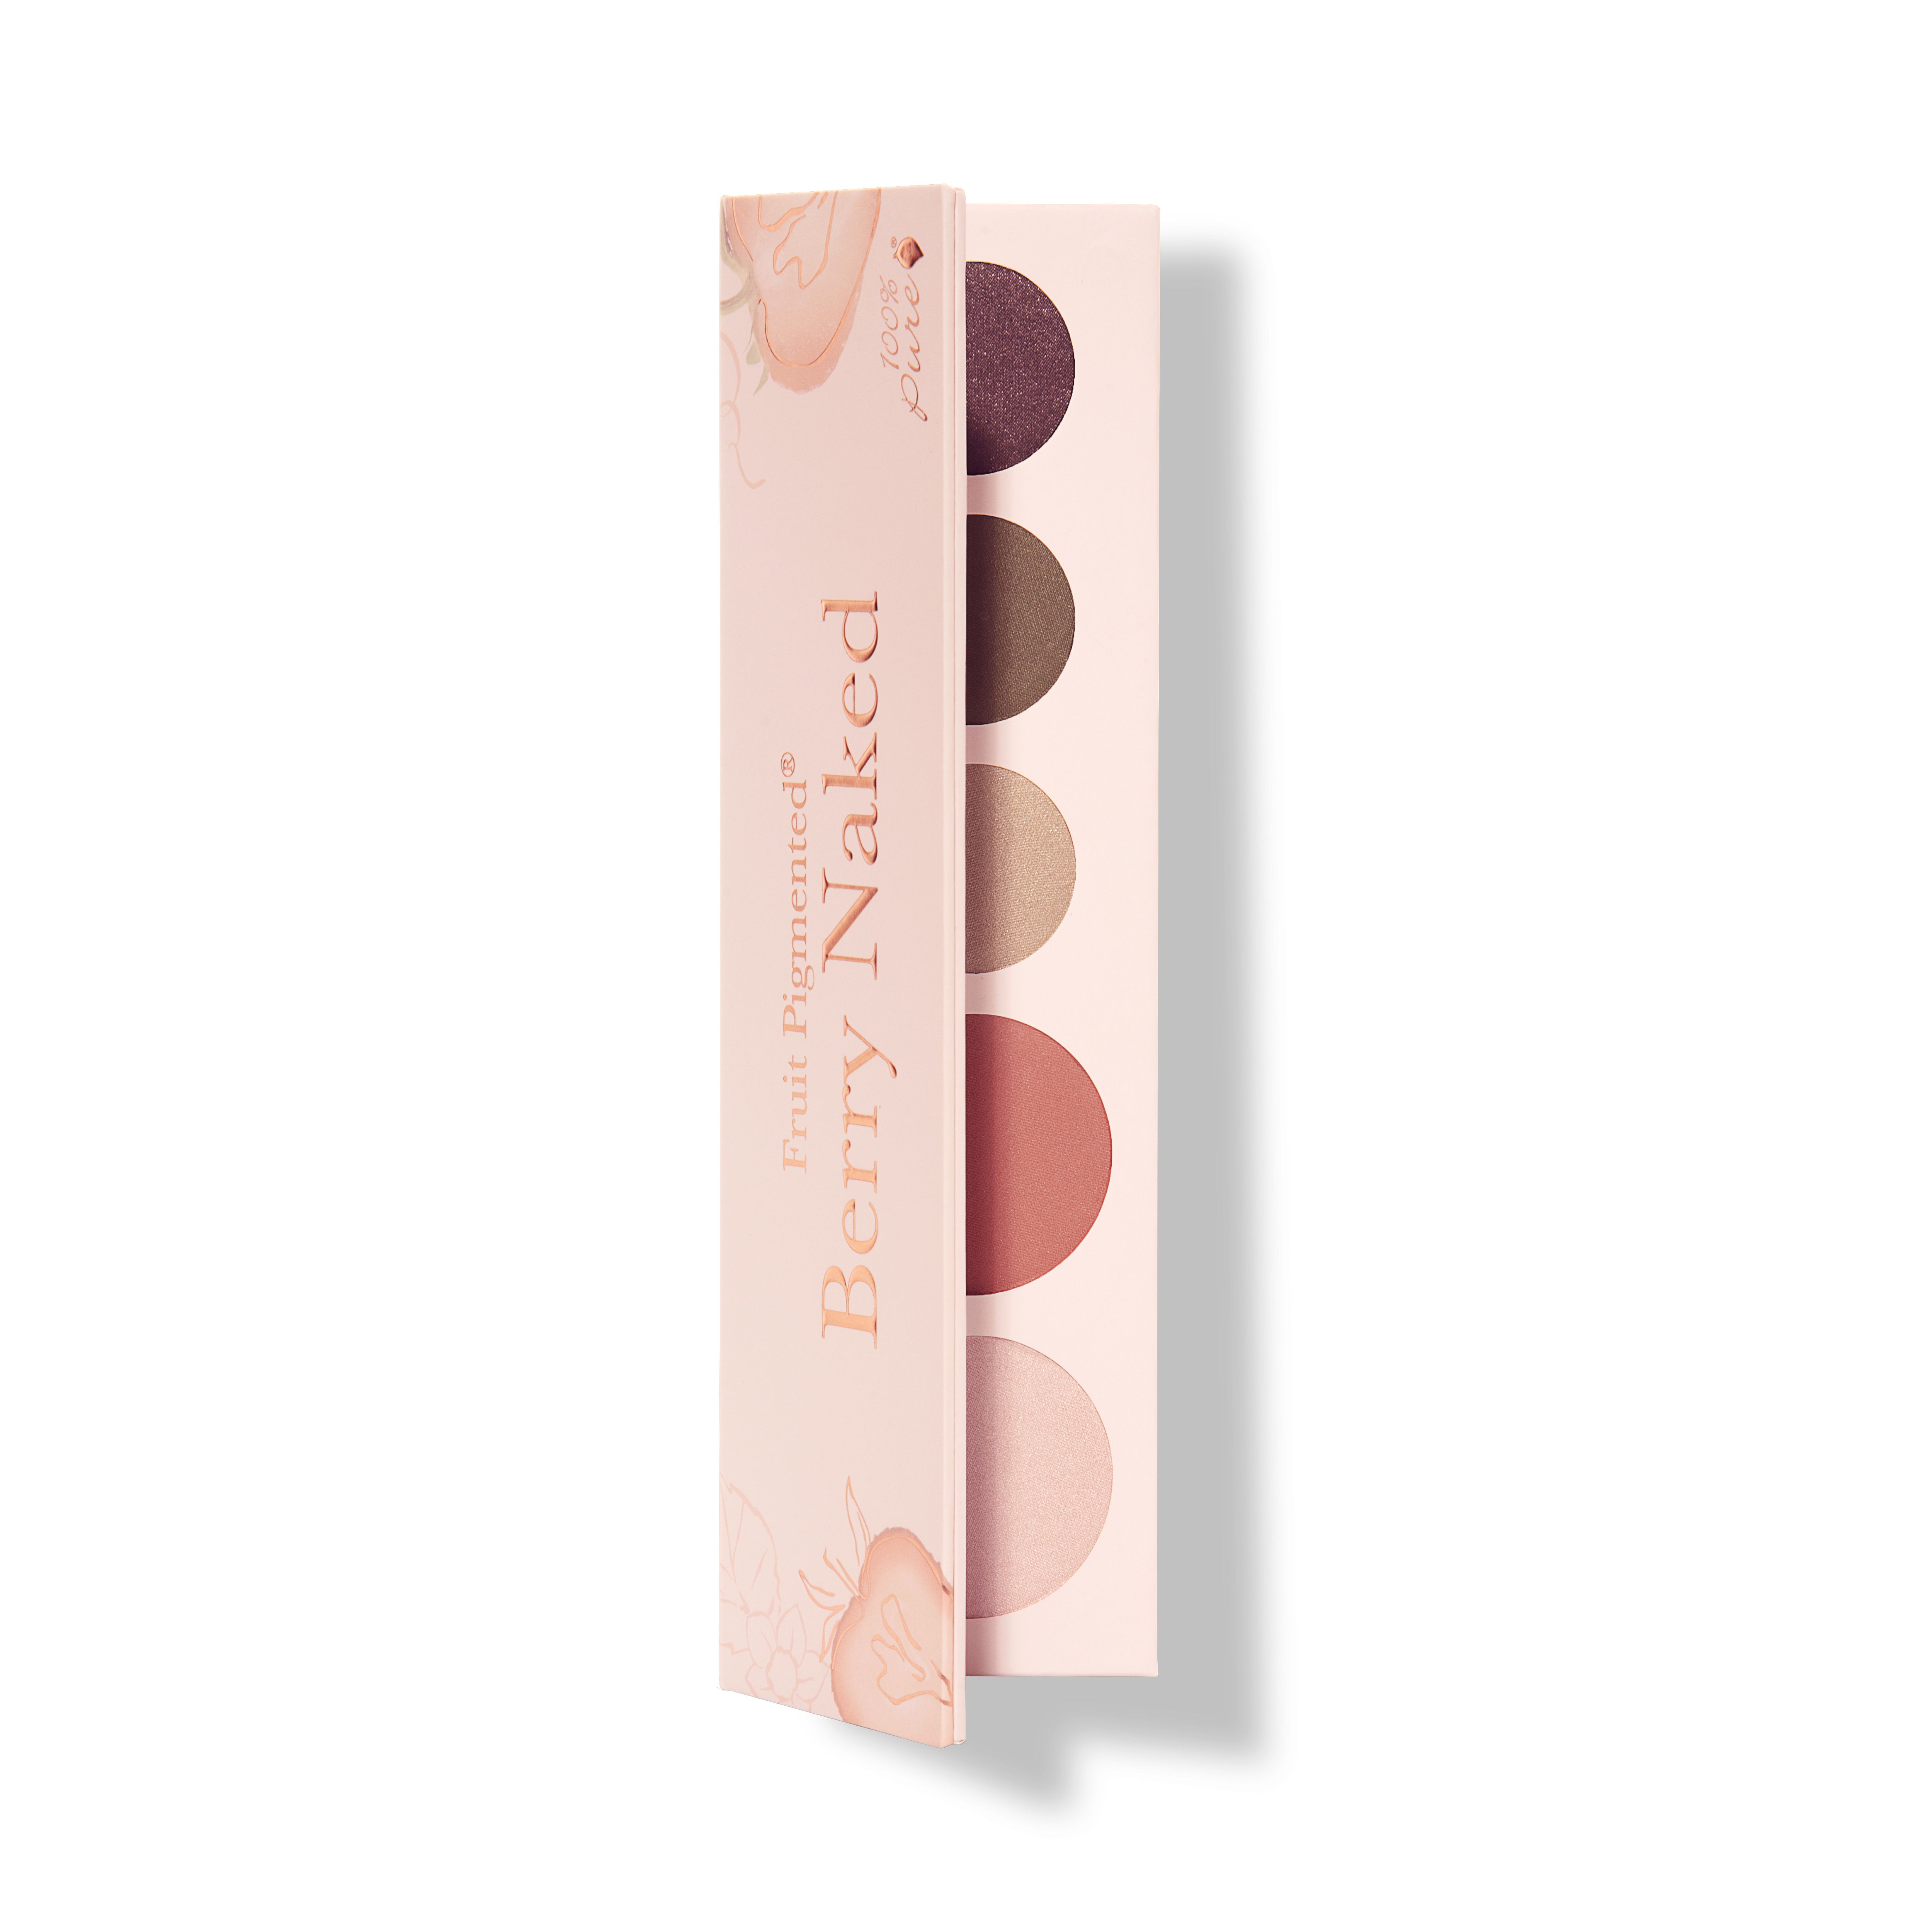 Fruit Pigmented® Berry Naked Palette | 100% PURE